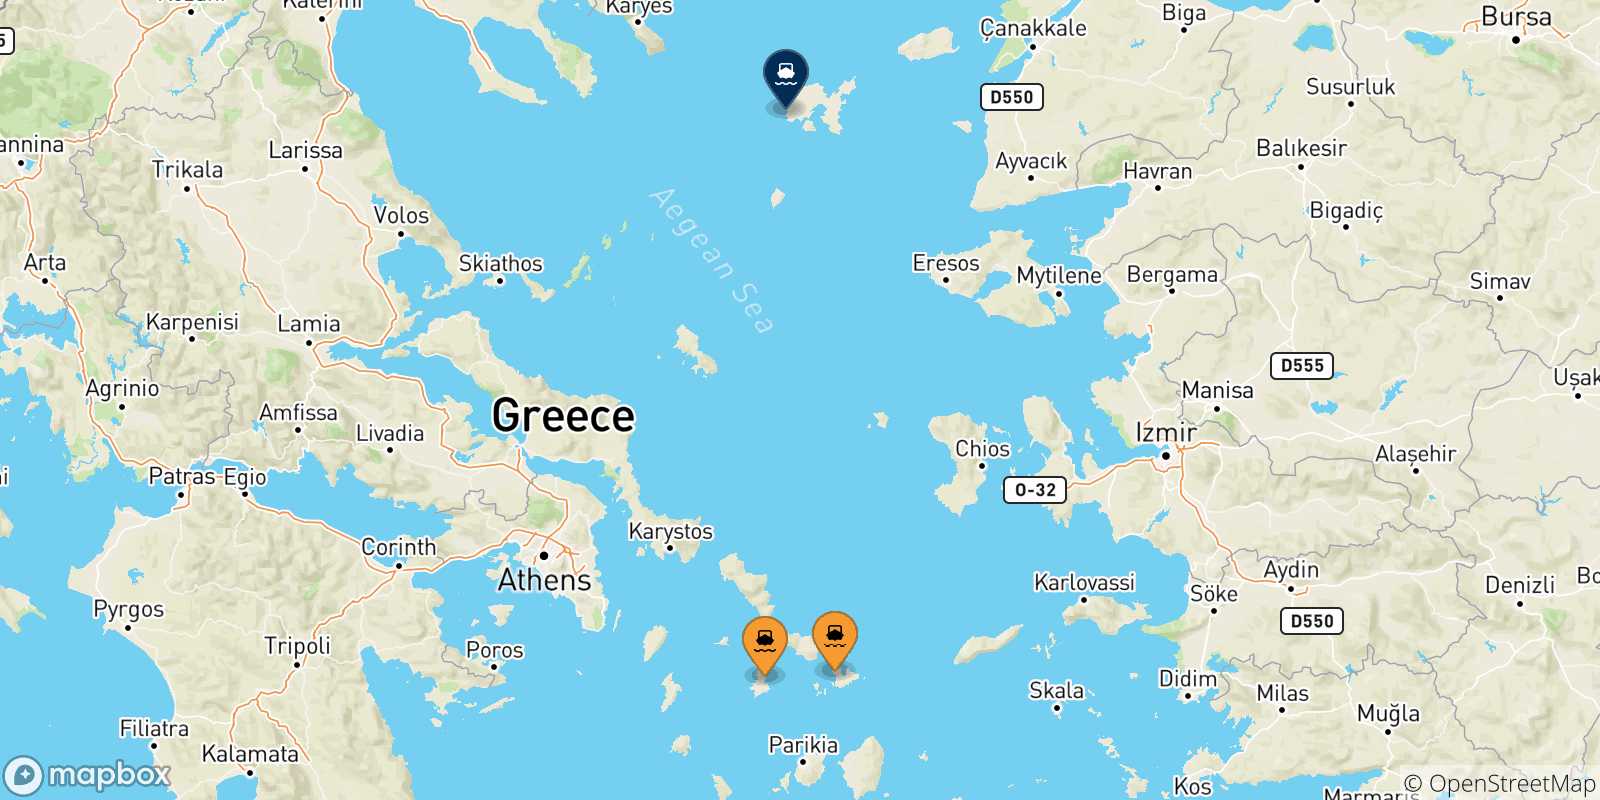 Map of the possible routes between Cyclades Islands and Myrina (Limnos)